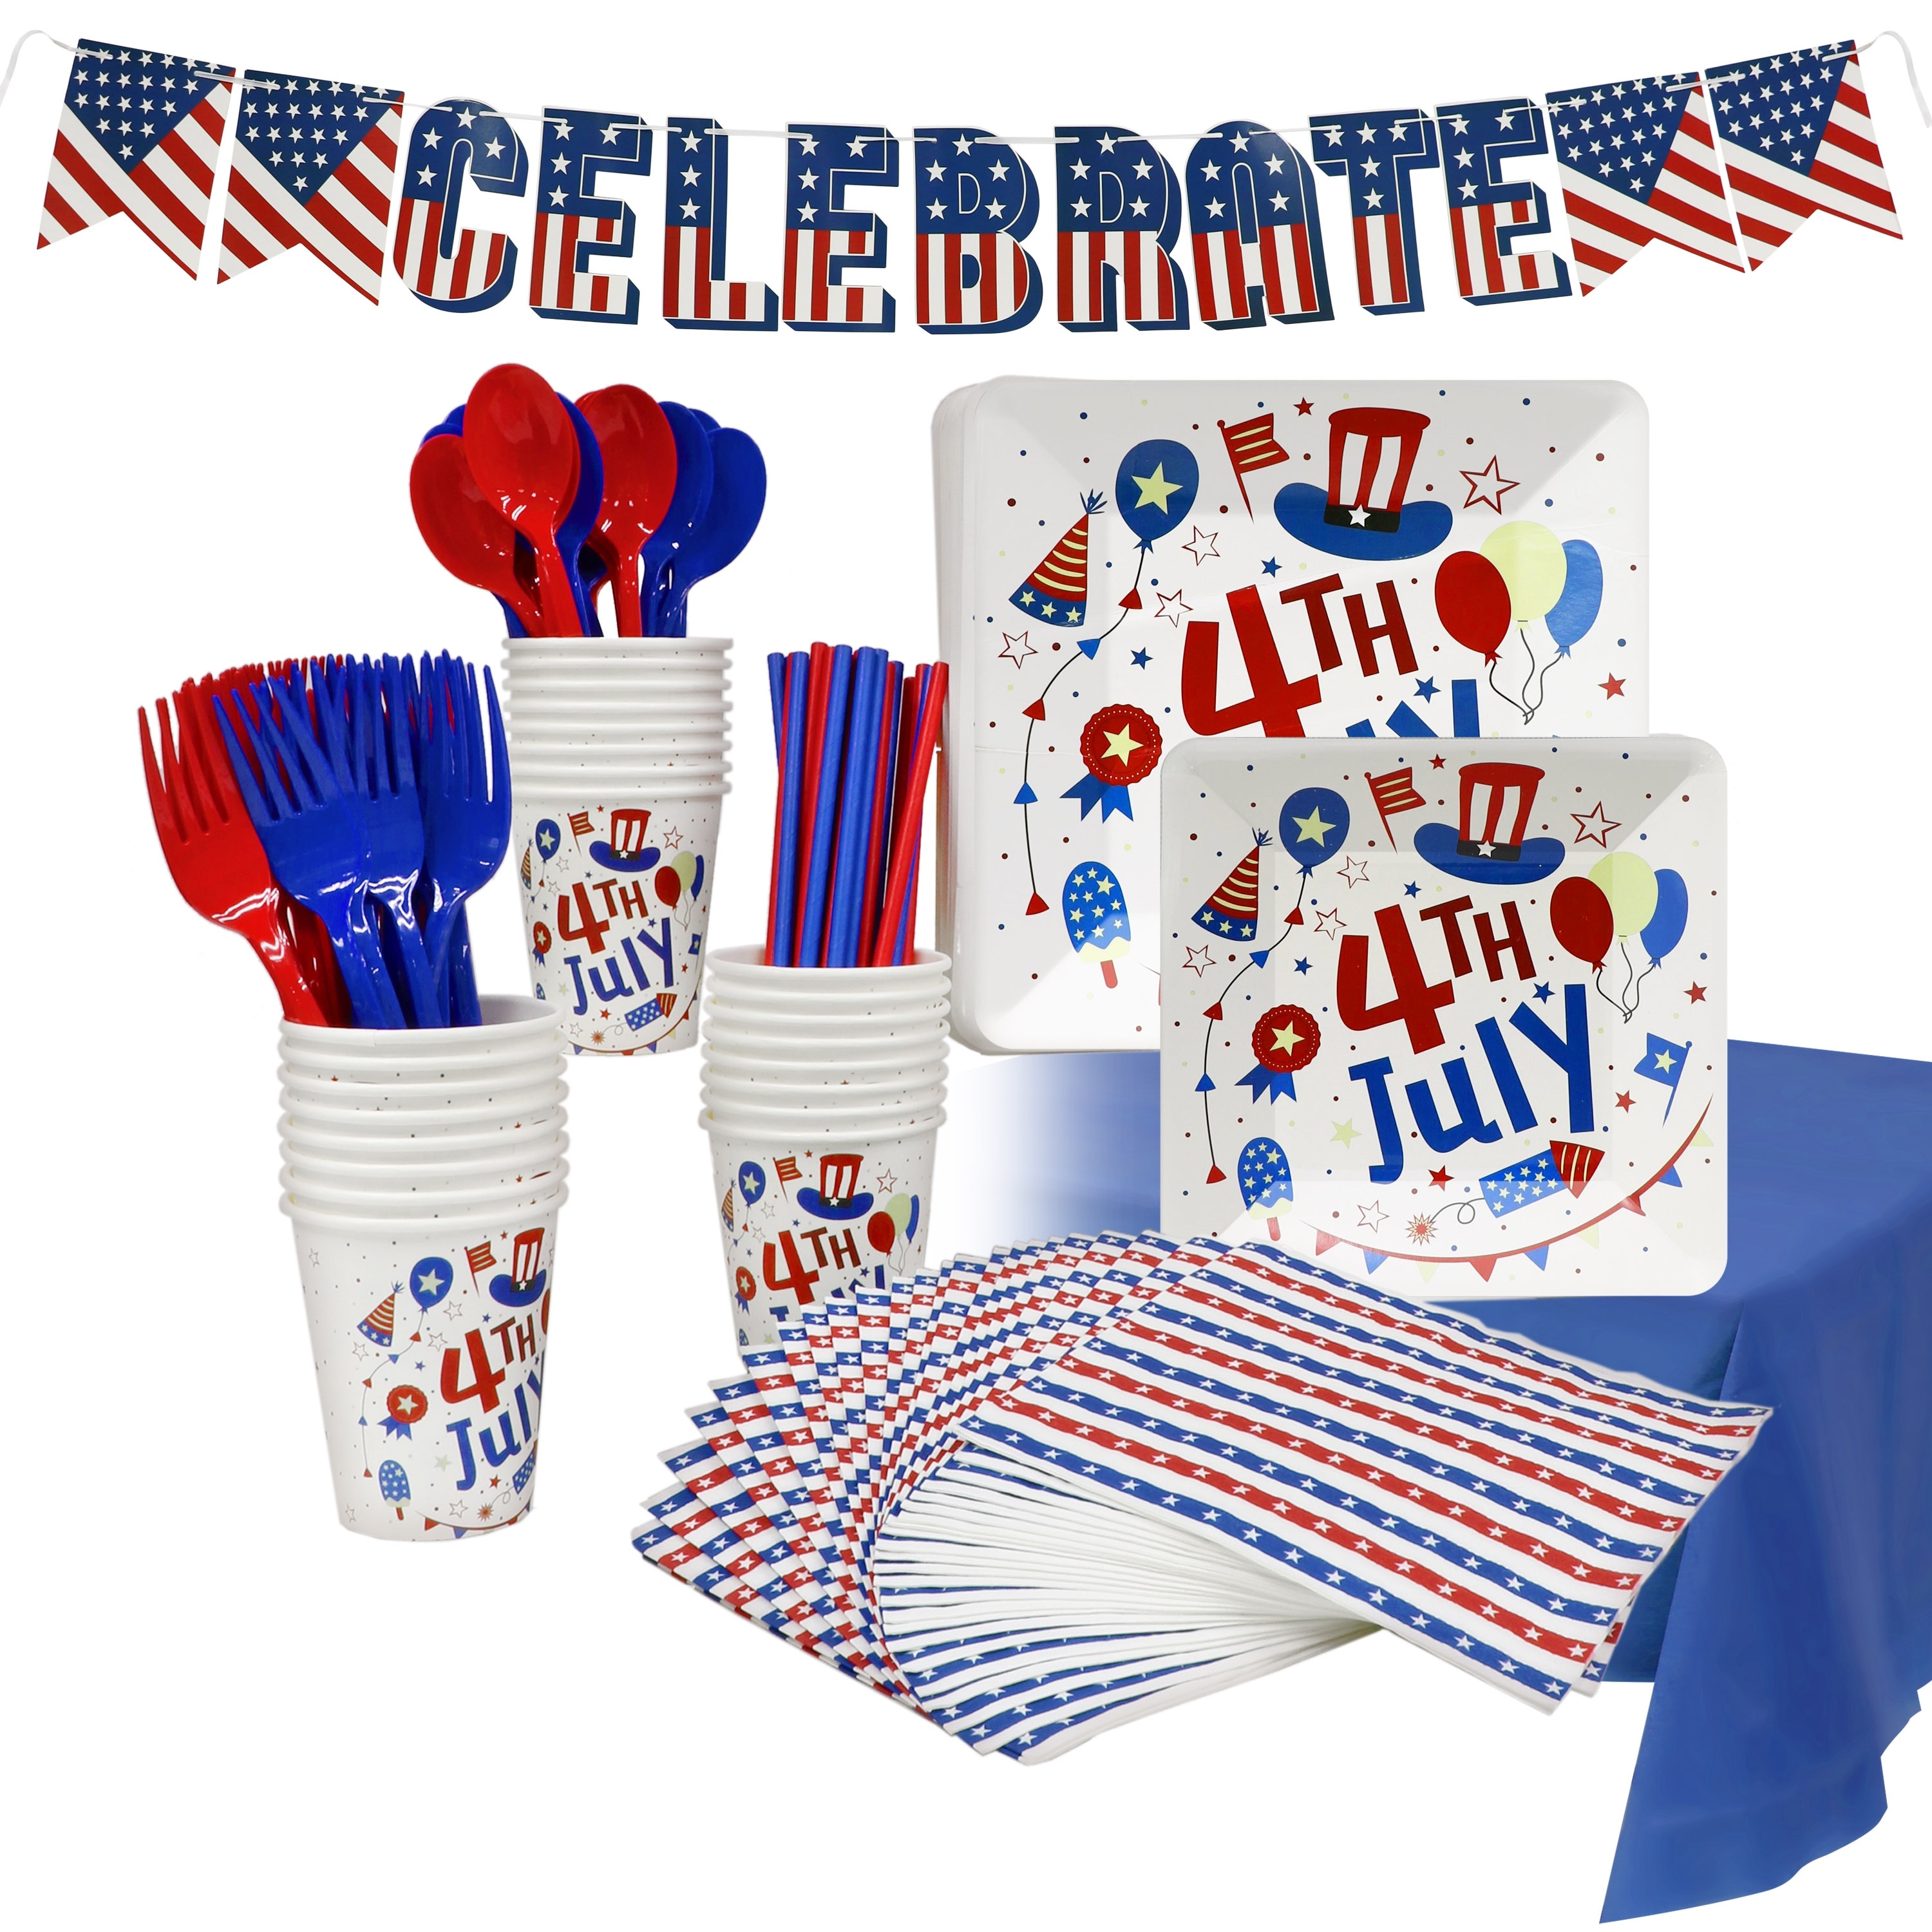 https://ak1.ostkcdn.com/images/products/is/images/direct/522c836fe257cf2e4c3a5c740a2bc1792bf8ef81/Puleo-171-PC.-Patriotic-4th-of-July-Disposable-Party-Plastic-Utensils%2C-Tableware%2C-and-D%C3%A9cor-Set-Serves-24.jpg